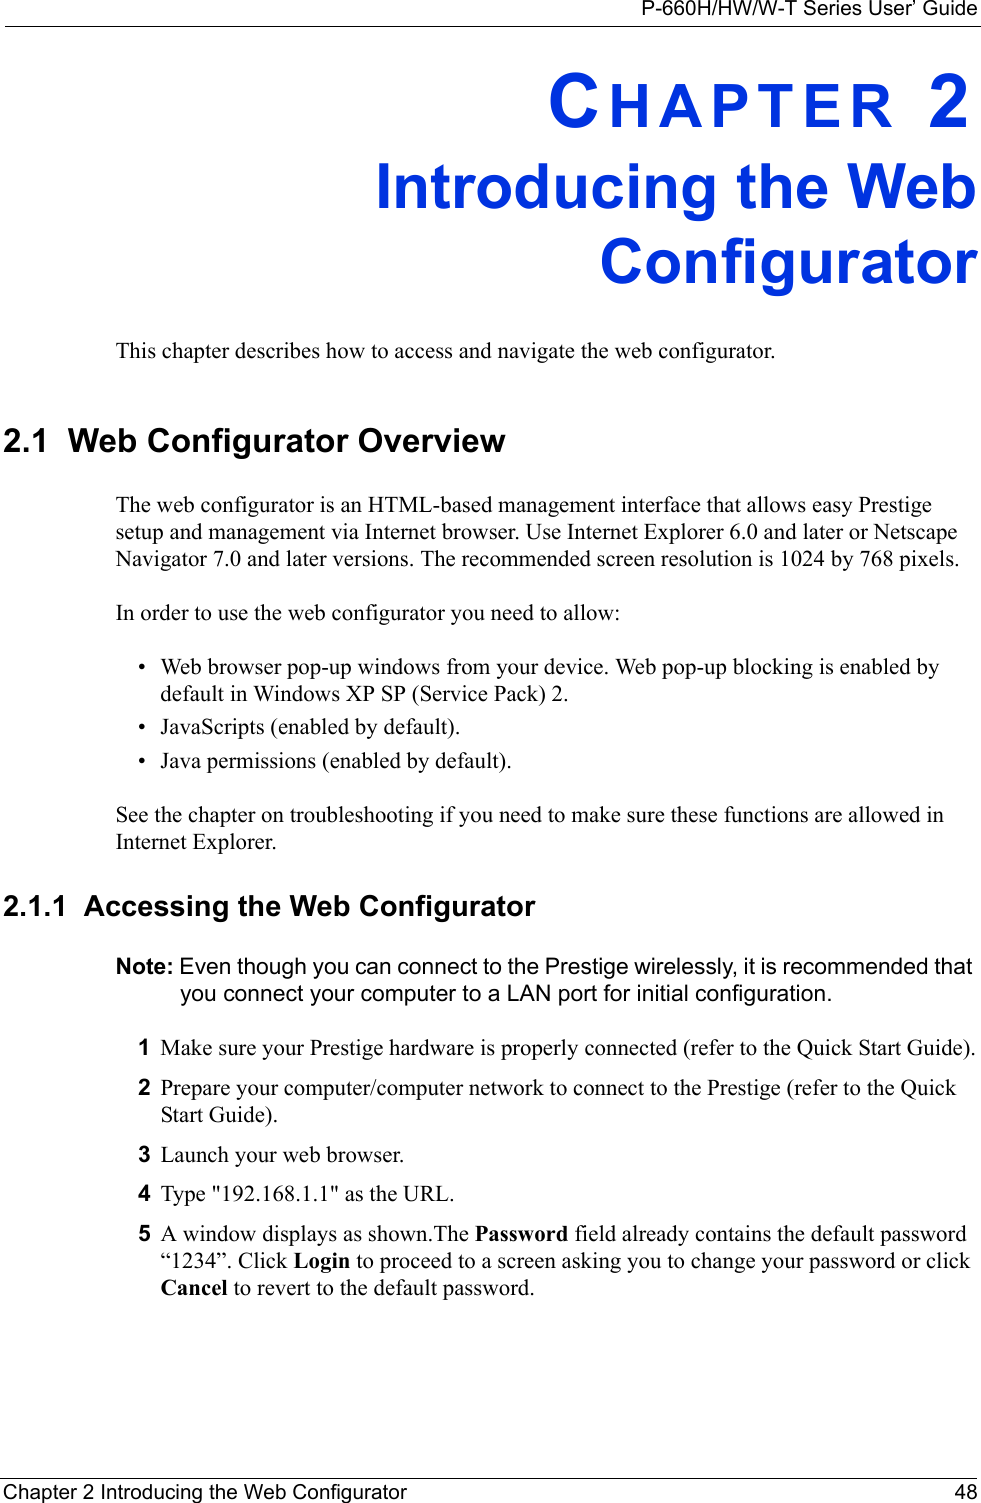 P-660H/HW/W-T Series User’ GuideChapter 2 Introducing the Web Configurator 48CHAPTER 2Introducing the WebConfiguratorThis chapter describes how to access and navigate the web configurator.2.1  Web Configurator OverviewThe web configurator is an HTML-based management interface that allows easy Prestige setup and management via Internet browser. Use Internet Explorer 6.0 and later or Netscape Navigator 7.0 and later versions. The recommended screen resolution is 1024 by 768 pixels.In order to use the web configurator you need to allow:• Web browser pop-up windows from your device. Web pop-up blocking is enabled by default in Windows XP SP (Service Pack) 2.• JavaScripts (enabled by default).• Java permissions (enabled by default).See the chapter on troubleshooting if you need to make sure these functions are allowed in Internet Explorer.2.1.1  Accessing the Web Configurator Note: Even though you can connect to the Prestige wirelessly, it is recommended that you connect your computer to a LAN port for initial configuration.1Make sure your Prestige hardware is properly connected (refer to the Quick Start Guide).2Prepare your computer/computer network to connect to the Prestige (refer to the Quick Start Guide).3Launch your web browser.4Type &quot;192.168.1.1&quot; as the URL.5A window displays as shown.The Password field already contains the default password “1234”. Click Login to proceed to a screen asking you to change your password or click Cancel to revert to the default password.